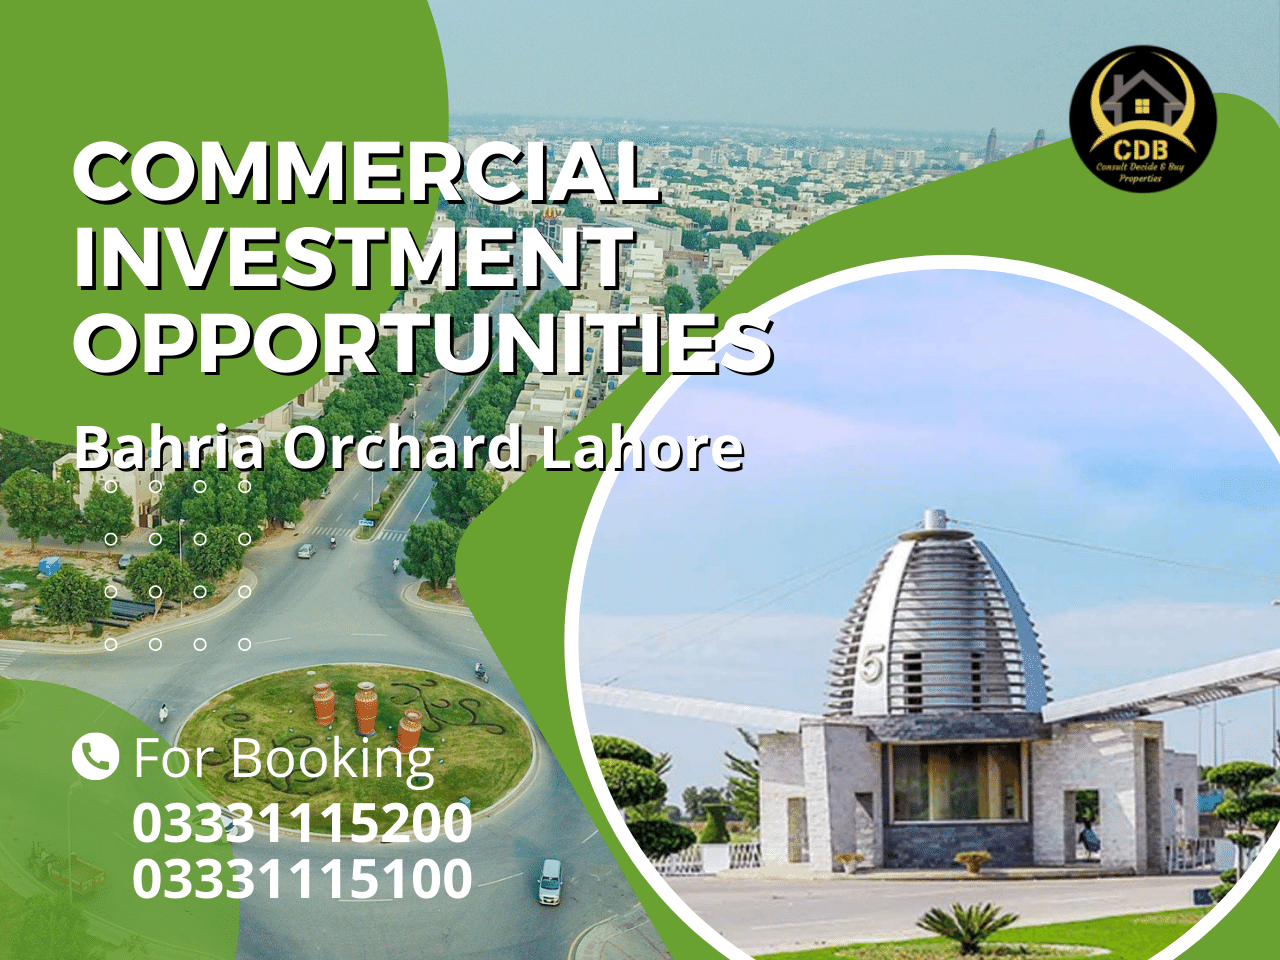 Bahria Orchard Lahore Commercial Investment